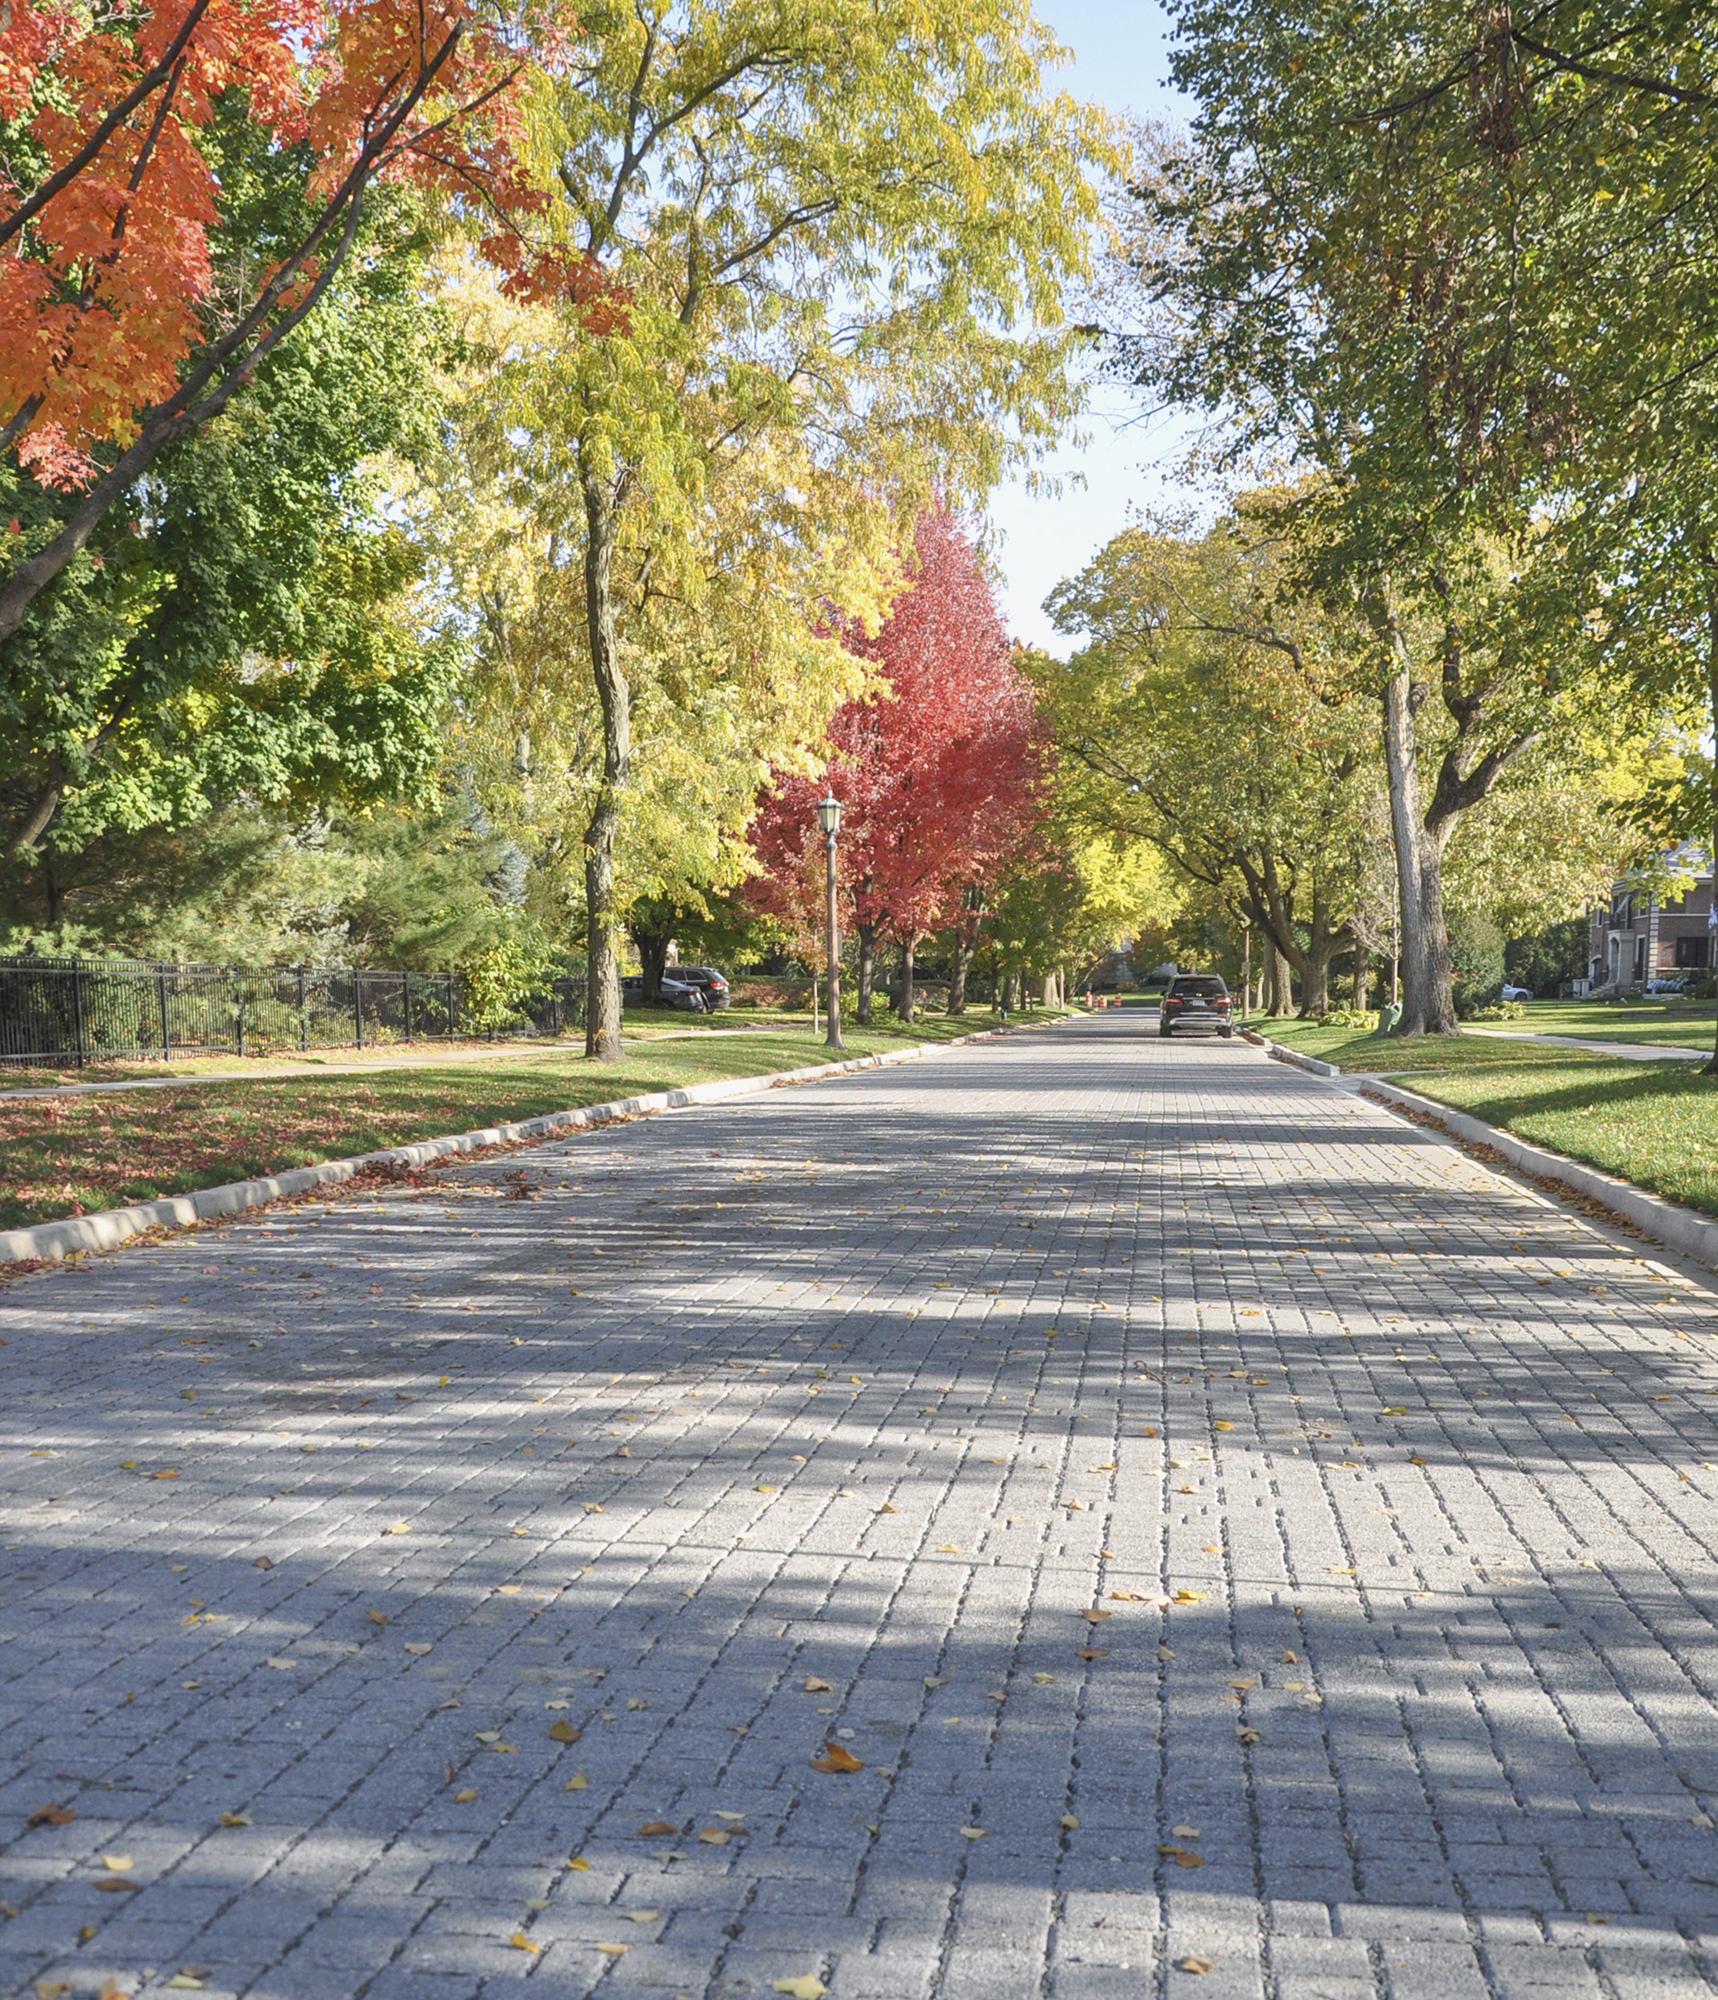 A tranquil streetscape lined with lush trees on either side, enhanced by a light grey Unilock paver roadway running down the middle.